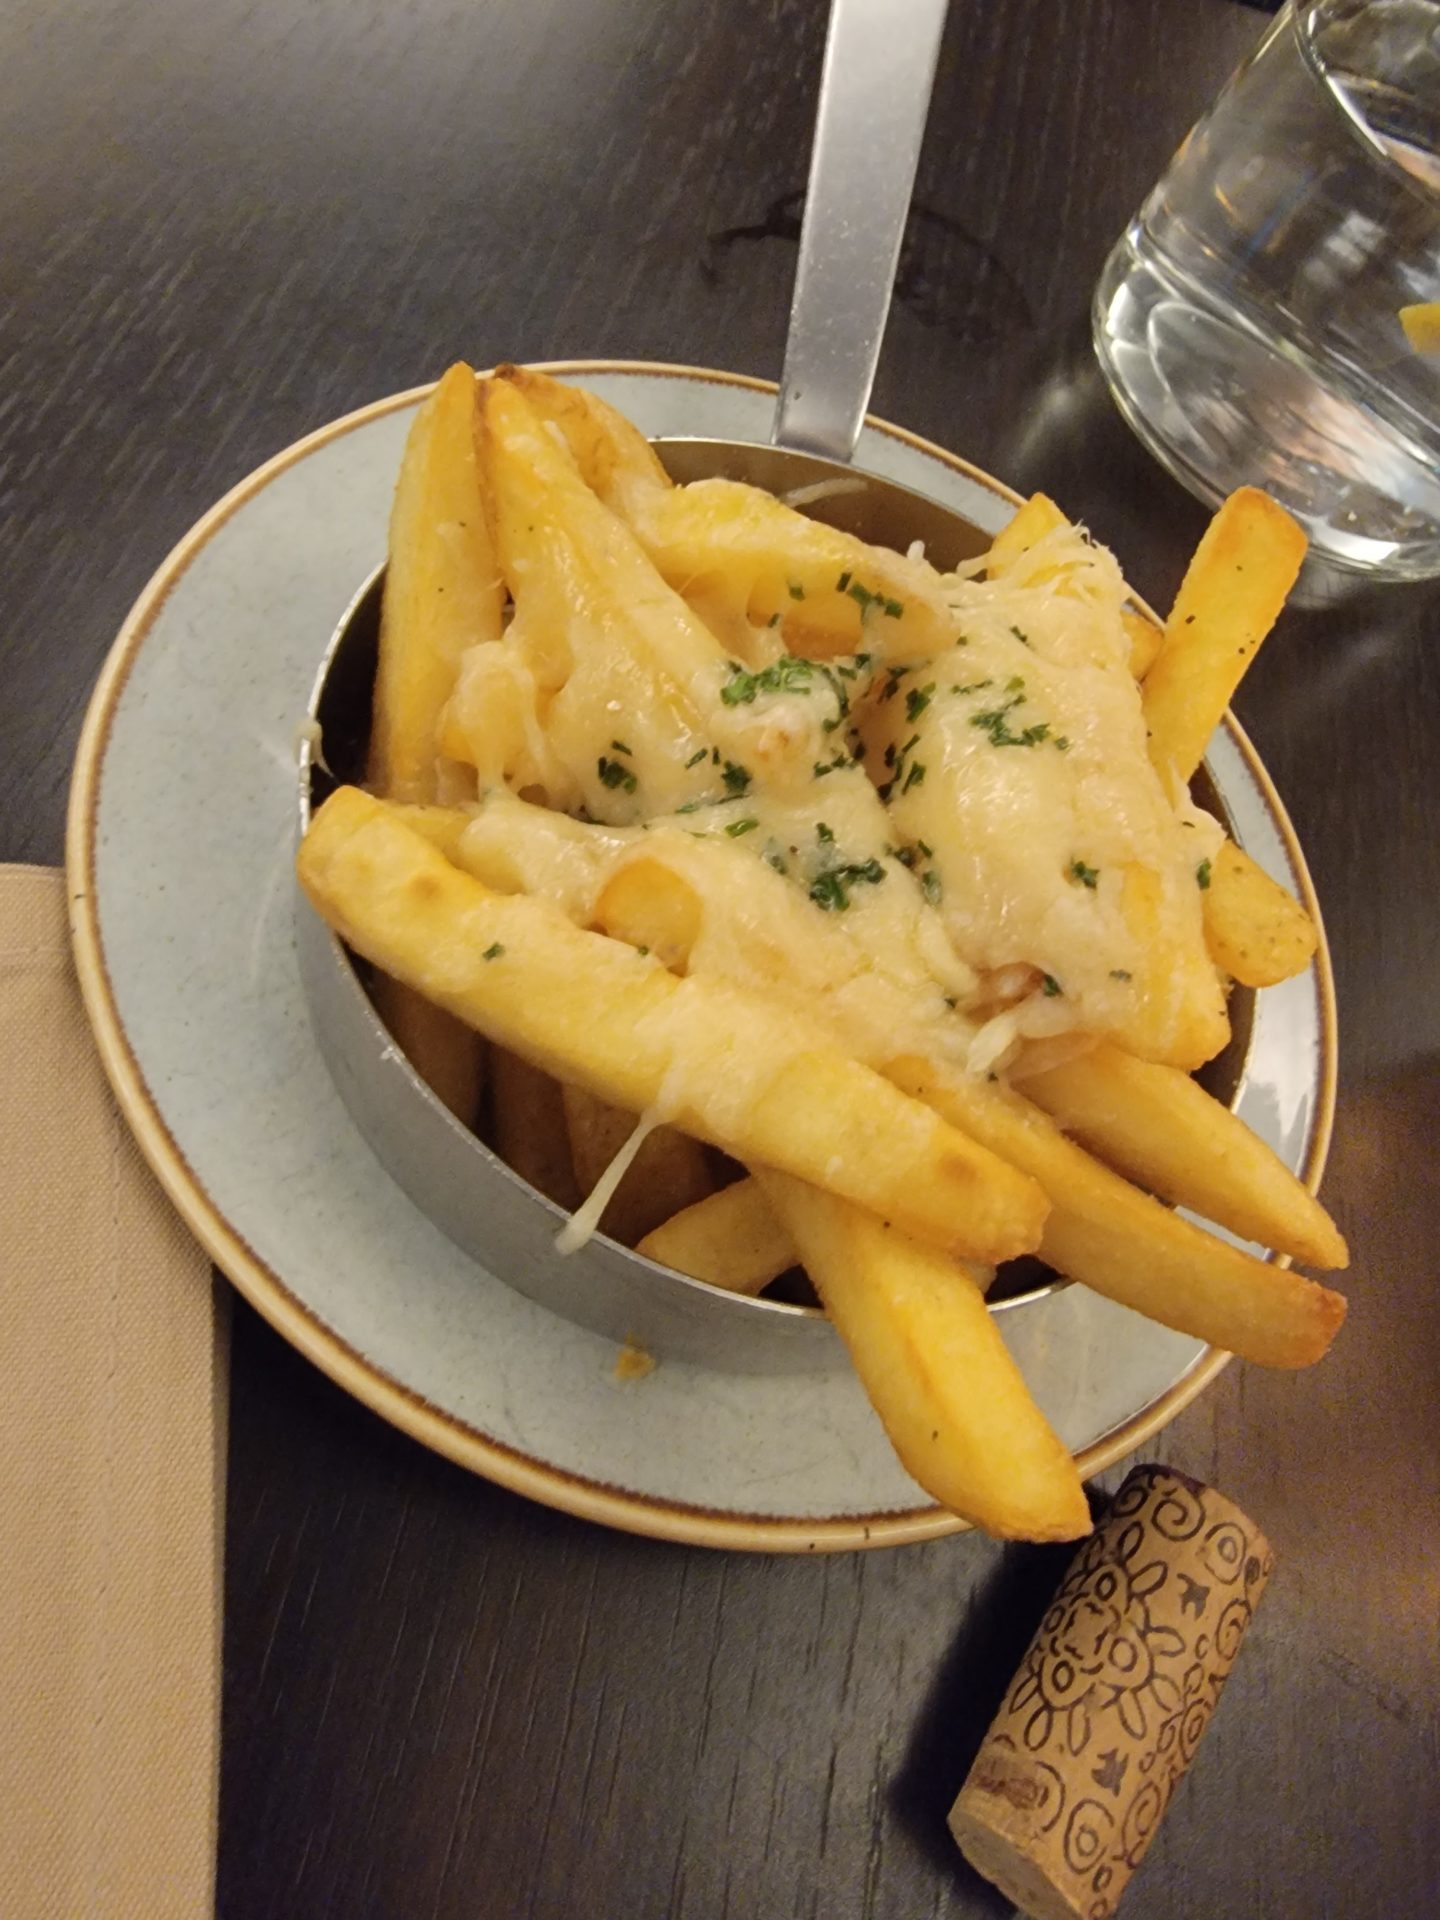 a bowl of french fries with cheese and herbs